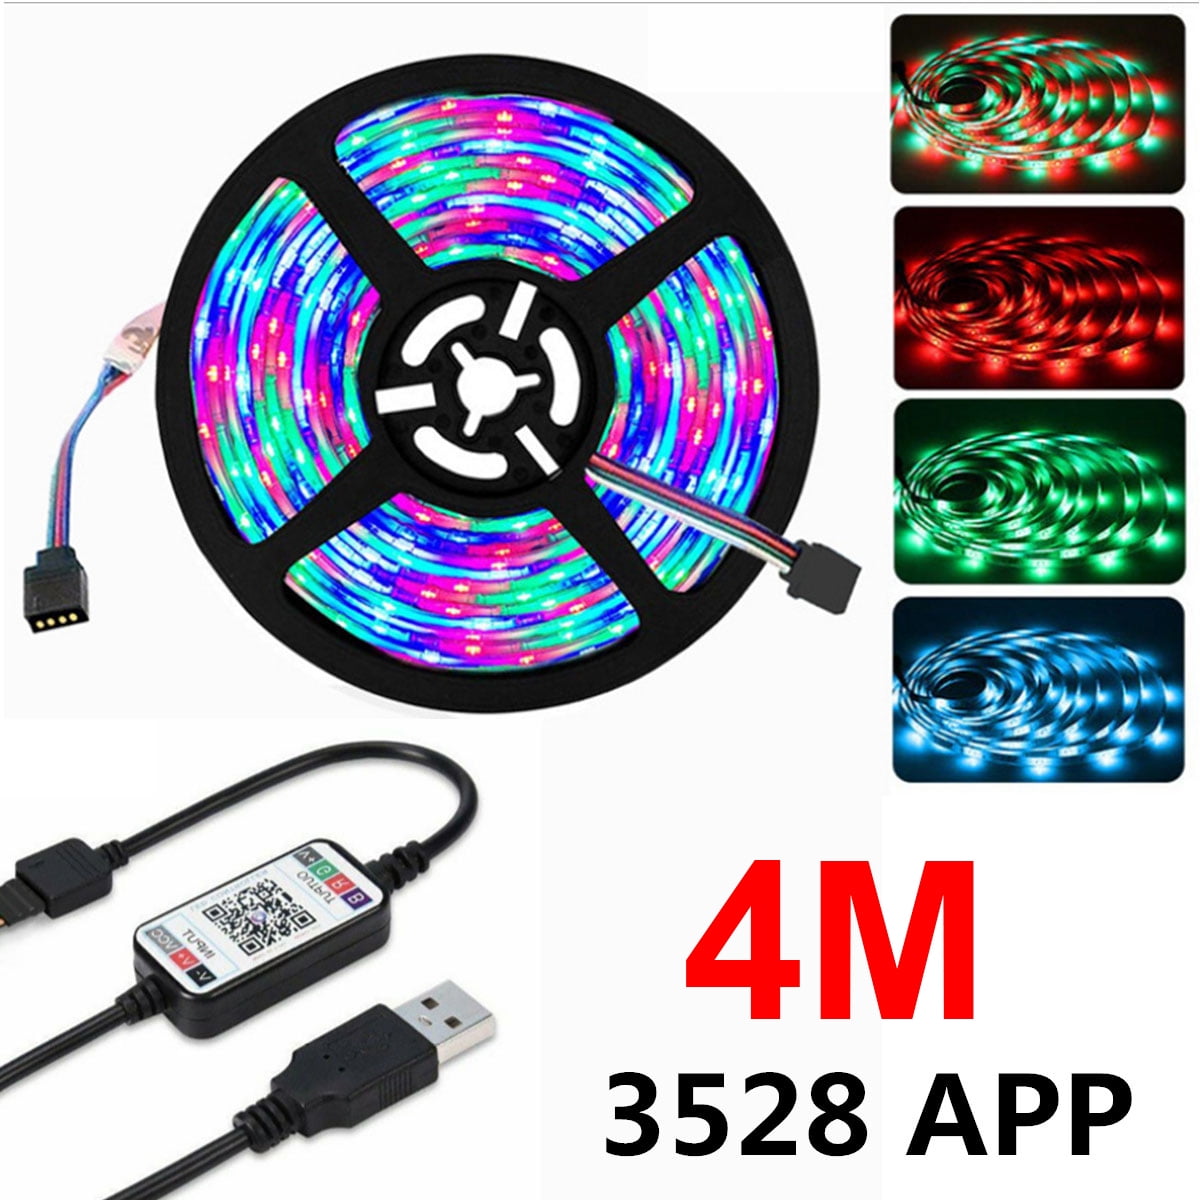 5V RGB 3528 LED Strip Light Flexible Tape Lamp Self Adhesive with Remote Control 